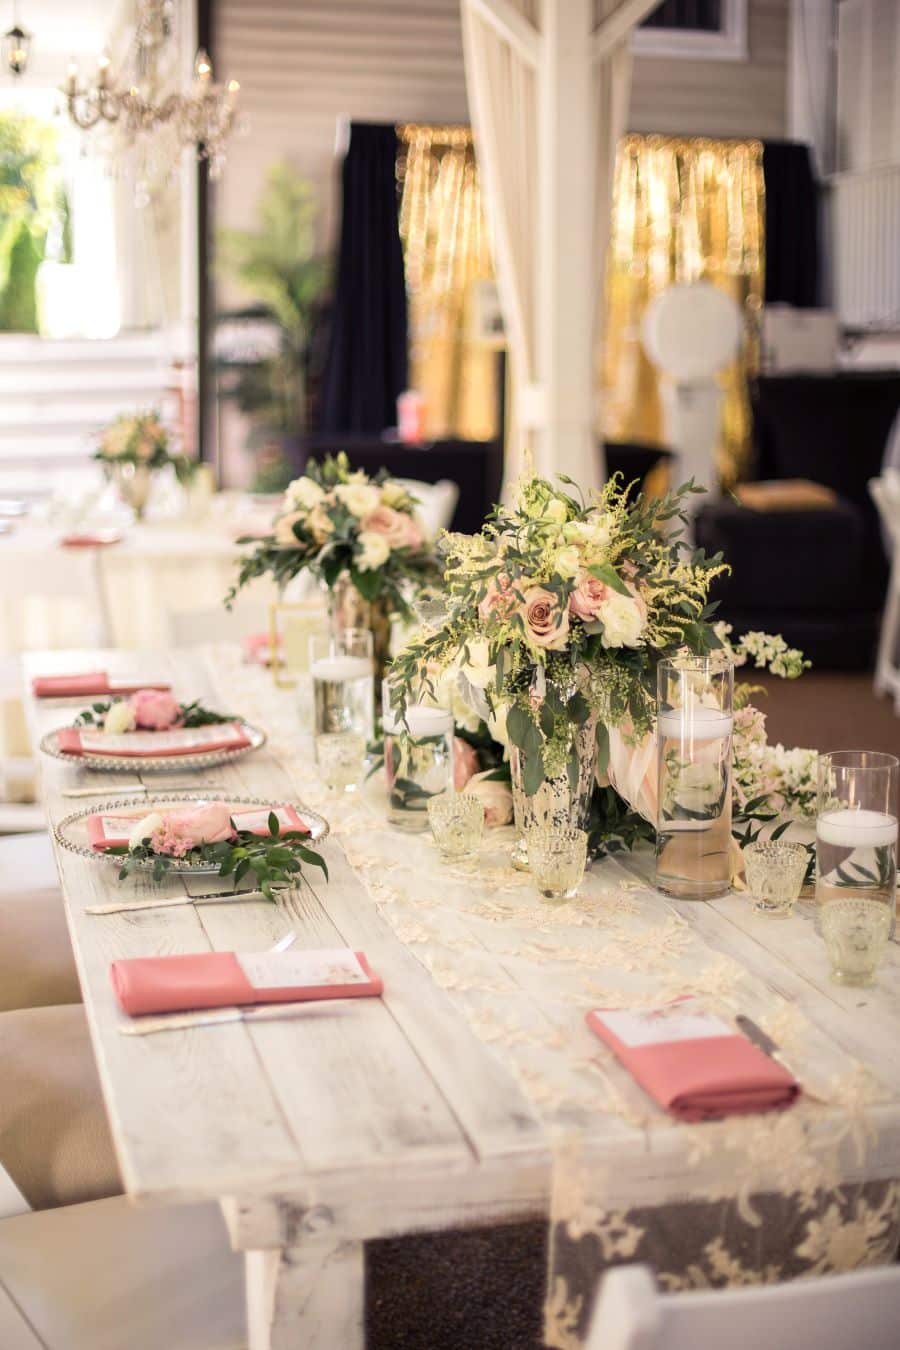 Gorgeous table setting with lace runner and pink accents for lgbt wedding at Nashville garden venue / Romantic / Summer / September / Pink / Dusty Rose / Cream